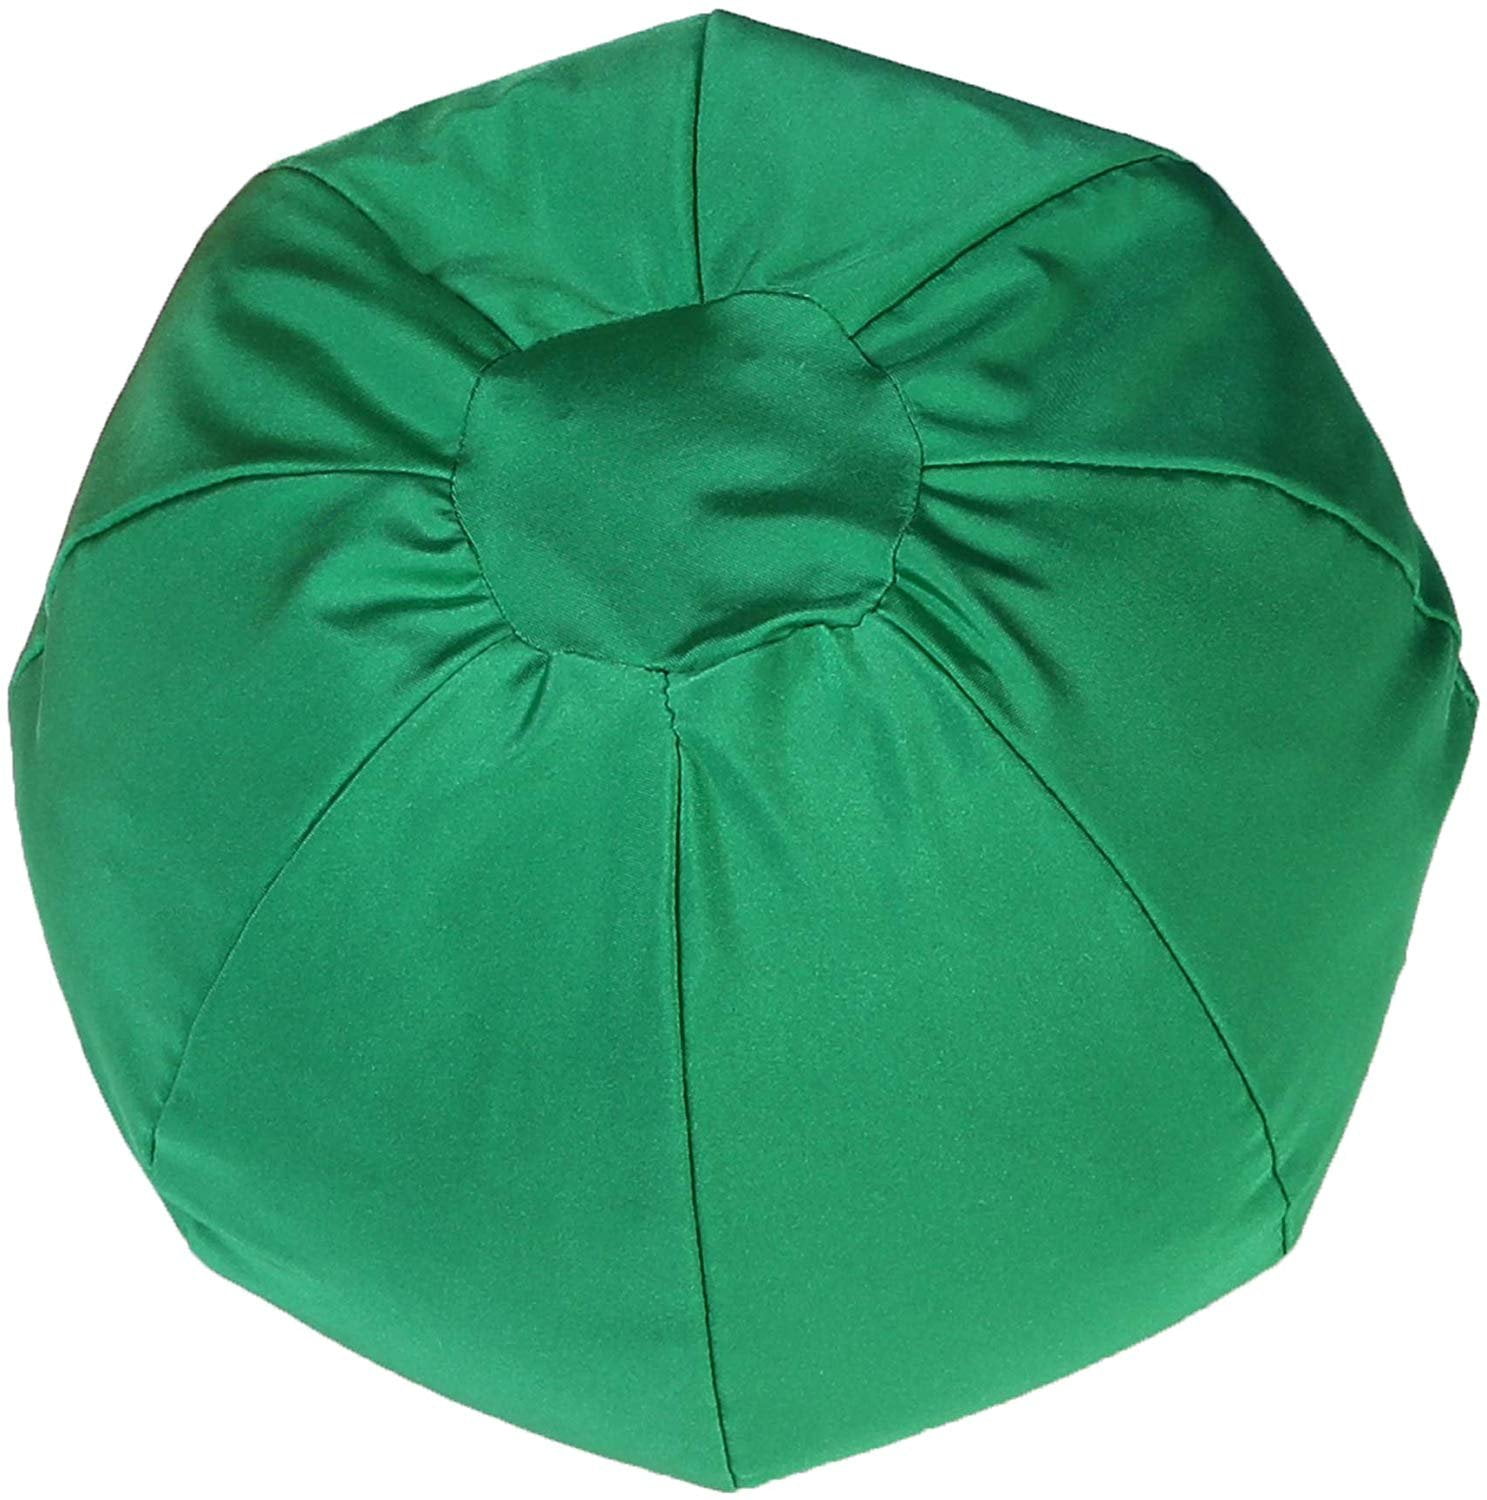 15 Different Types of Bean Bag Chairs - DigsTalk